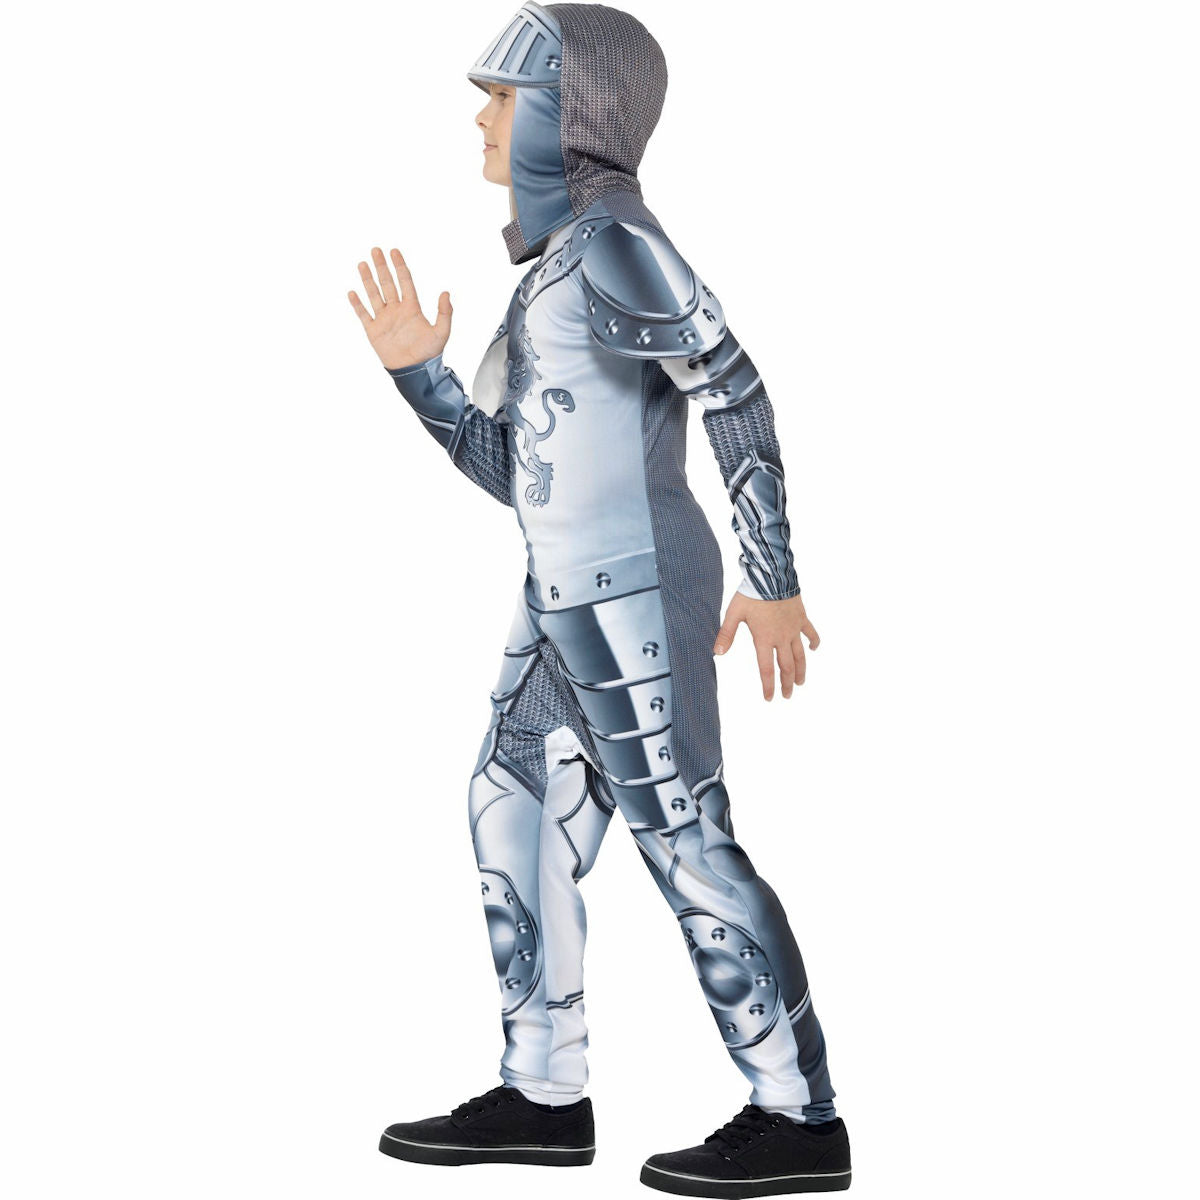 Deluxe Armour Knight Medieval Child Book Week Costume